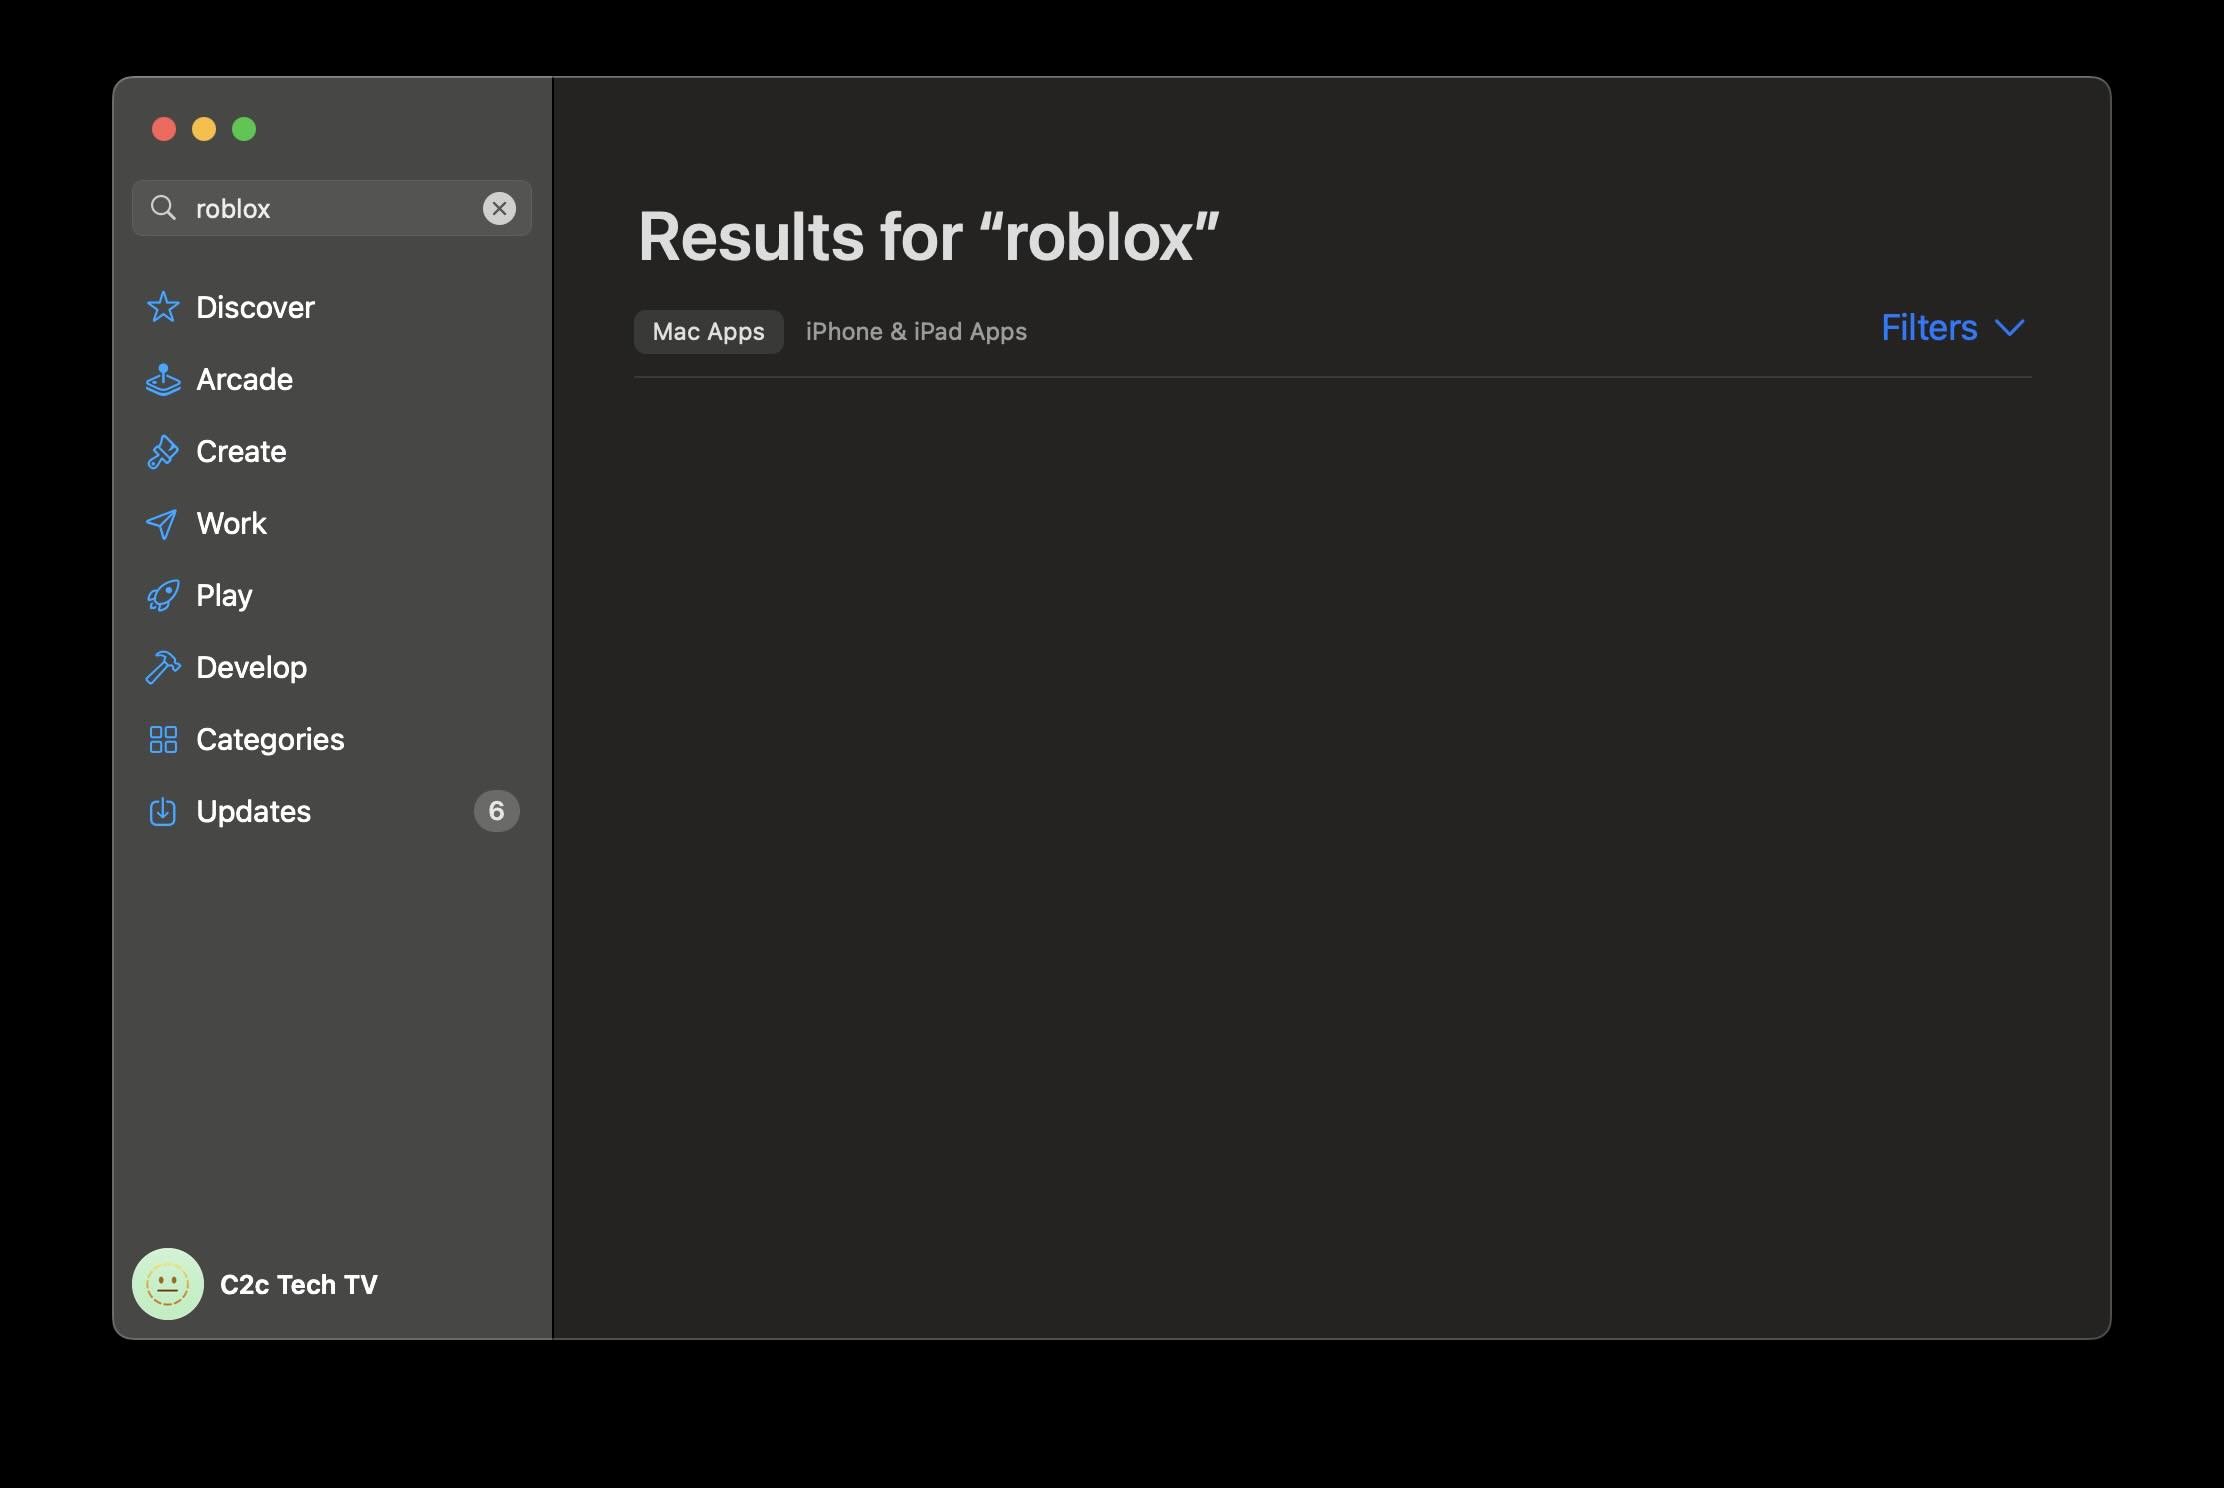 Searching roblox on Mac App Store